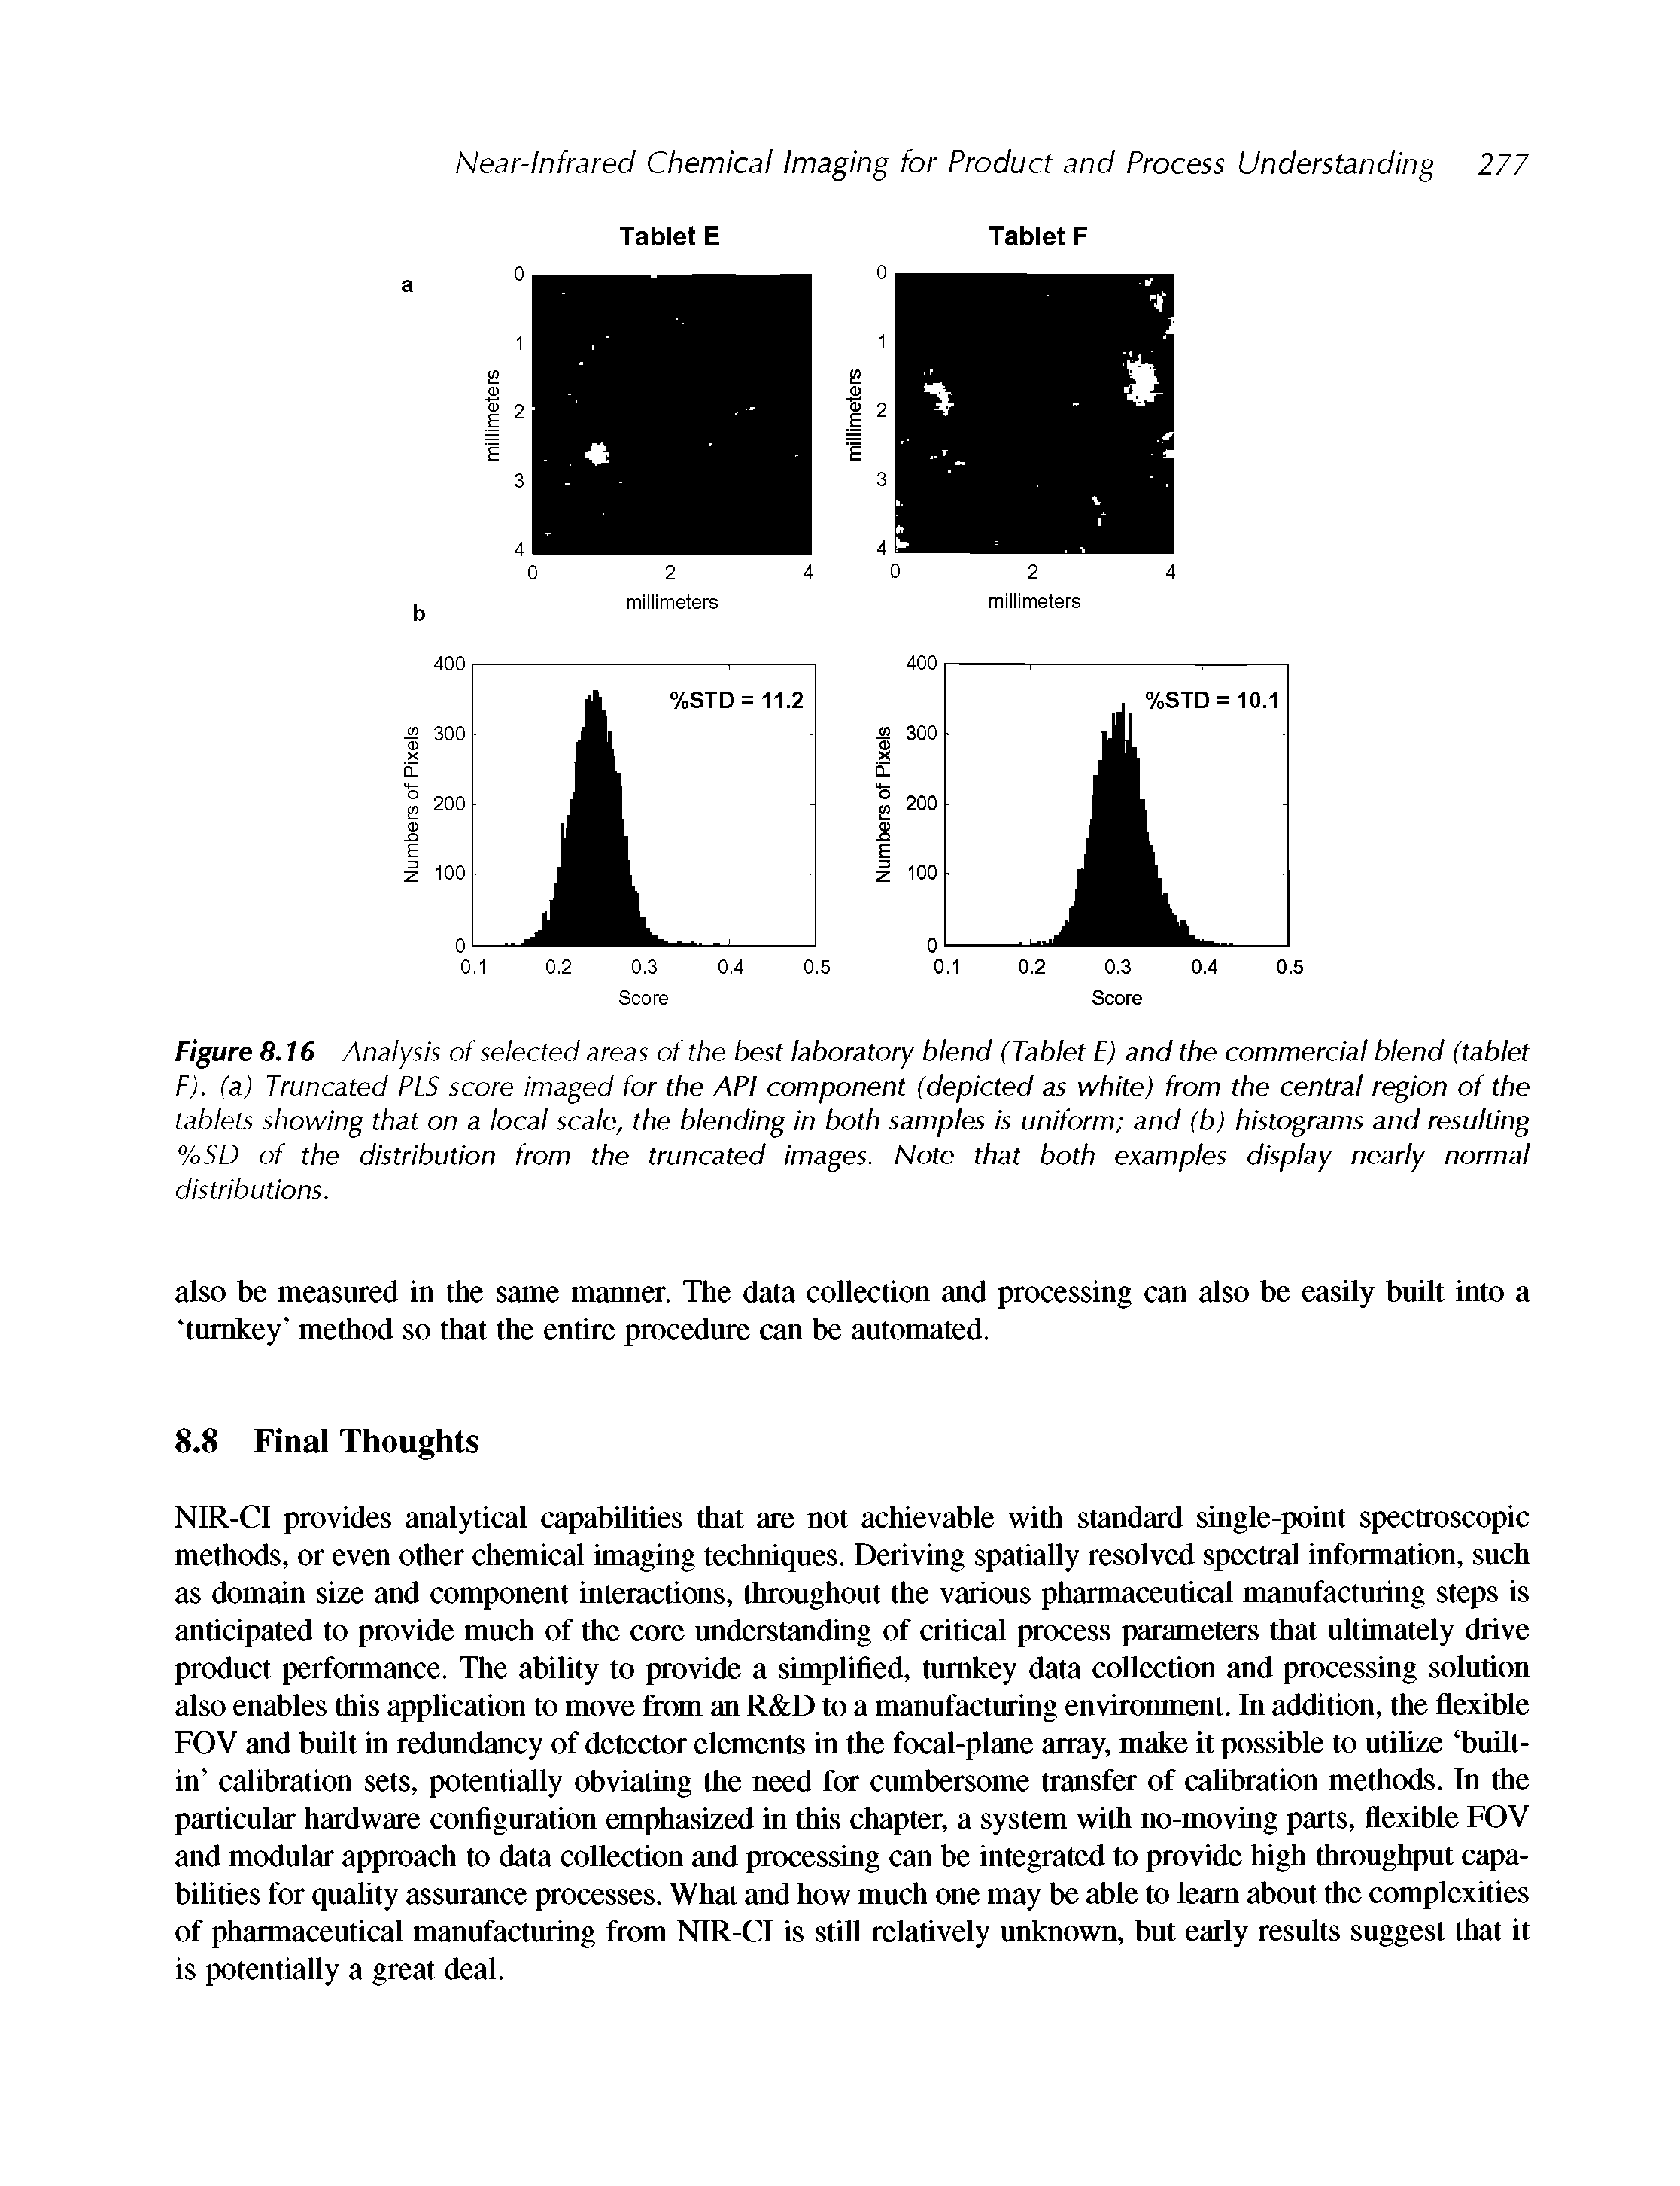 Figure 8.16 Analysis of selected areas of the best laboratory blend (Tablet E) and the commercial blend (tablet F). (a) Truncated PLS score imaged for the API component (depicted as white) from the central region of the tablets showing that on a local scale, the blending in both samples is uniform and (b) histograms and resulting %SD of the distribution from the truncated images. Note that both examples display nearly normal distributions.